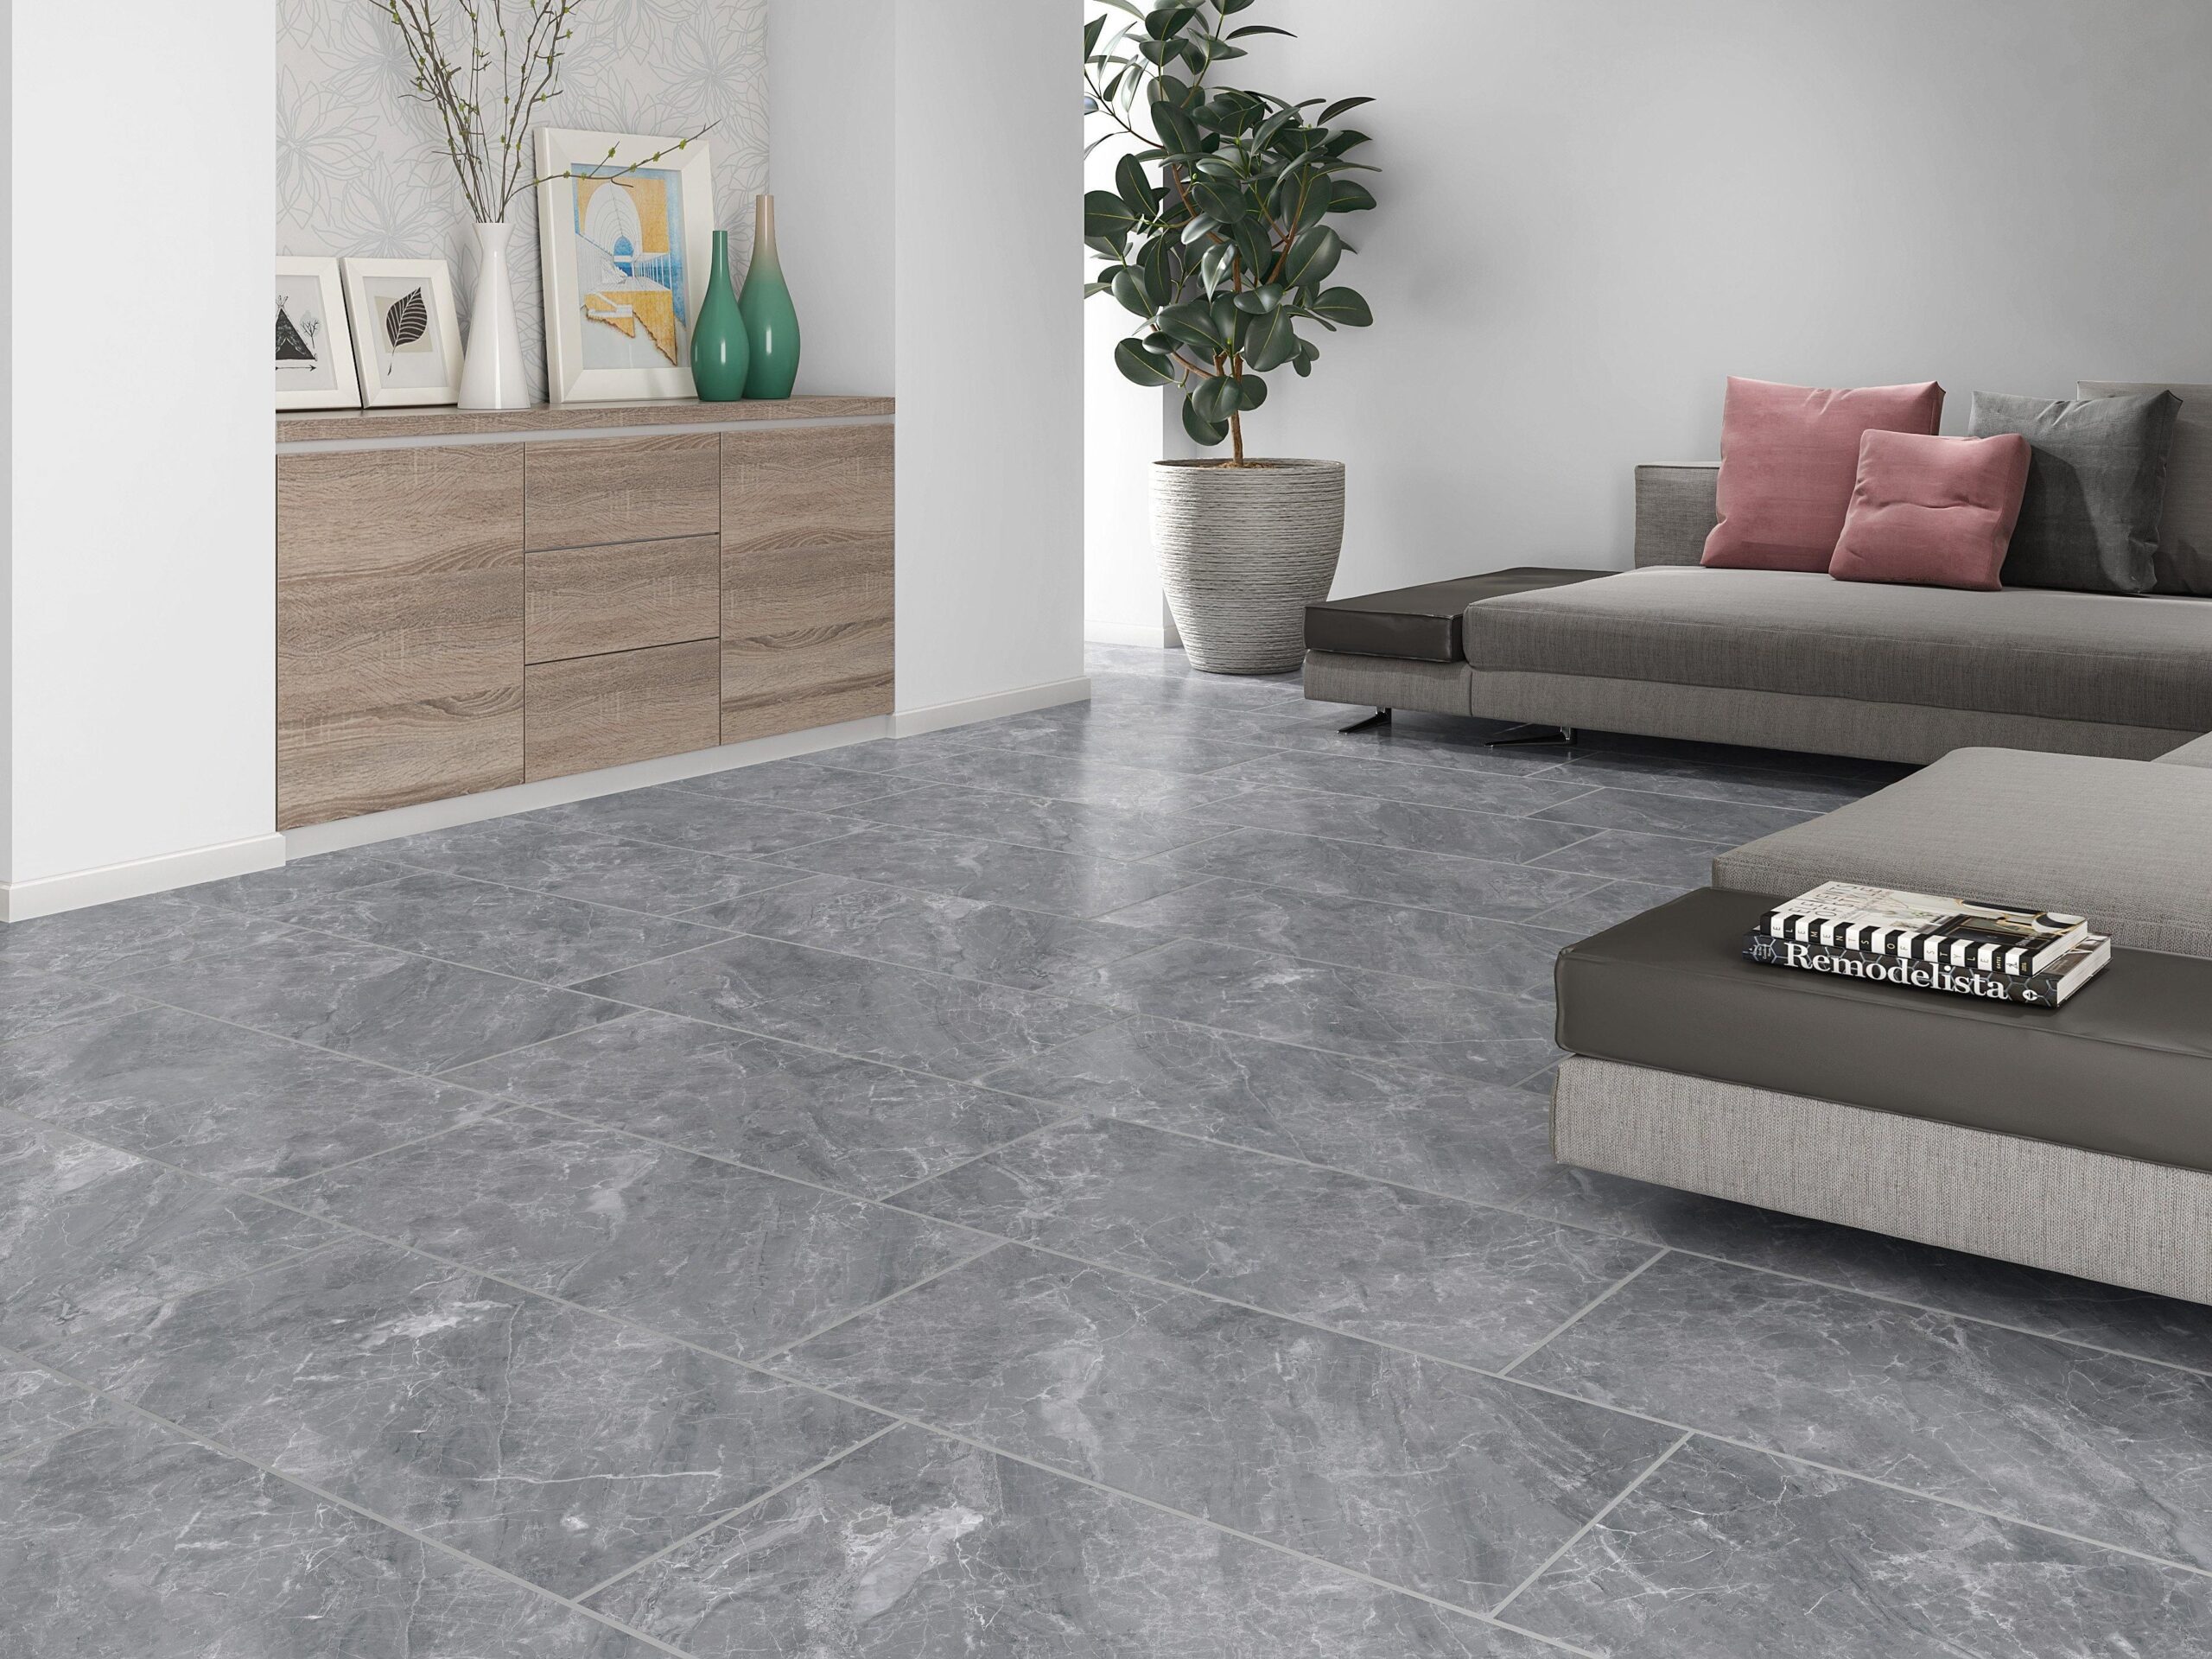 A Comprehensive DIY Guide on How to Install Ceramic Floor Tiles